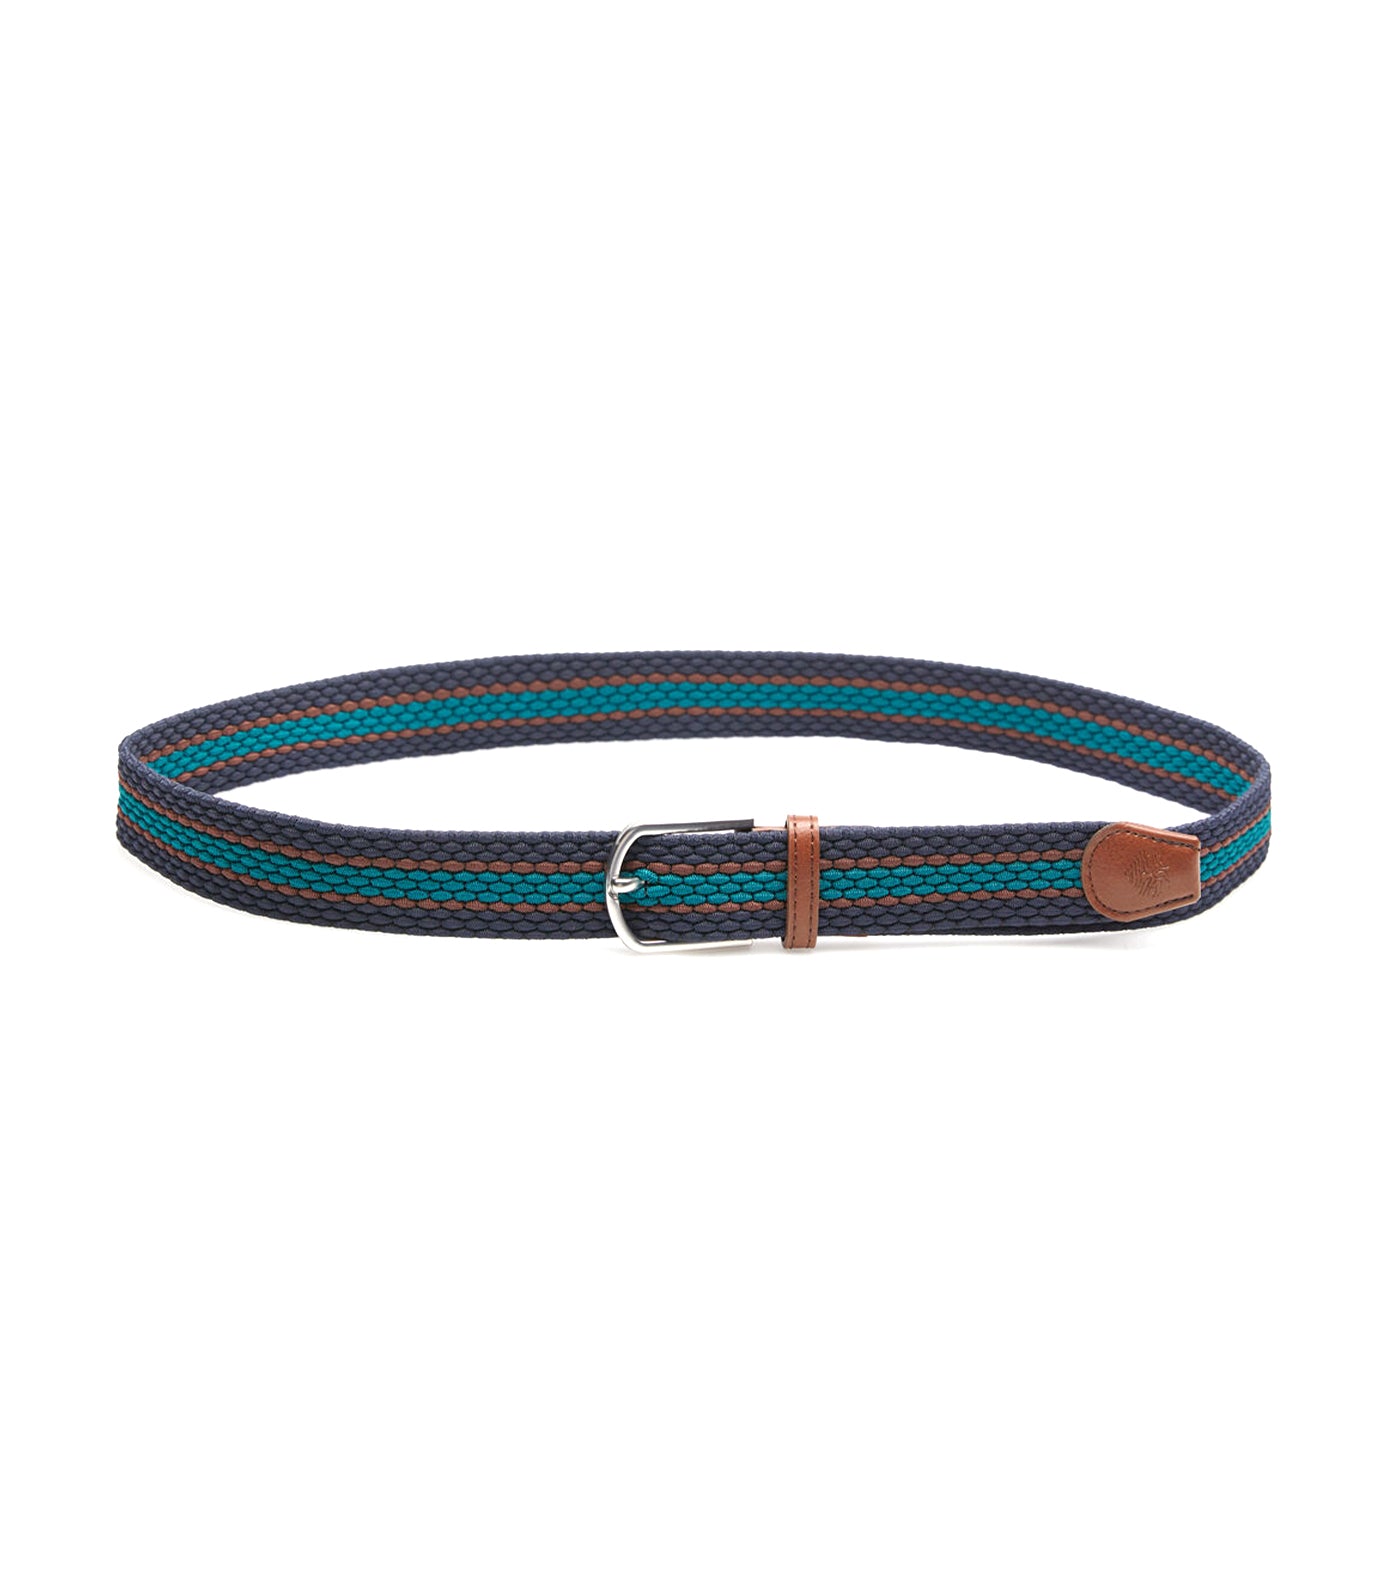 Essential Colored Woven Belt Blue/Teal